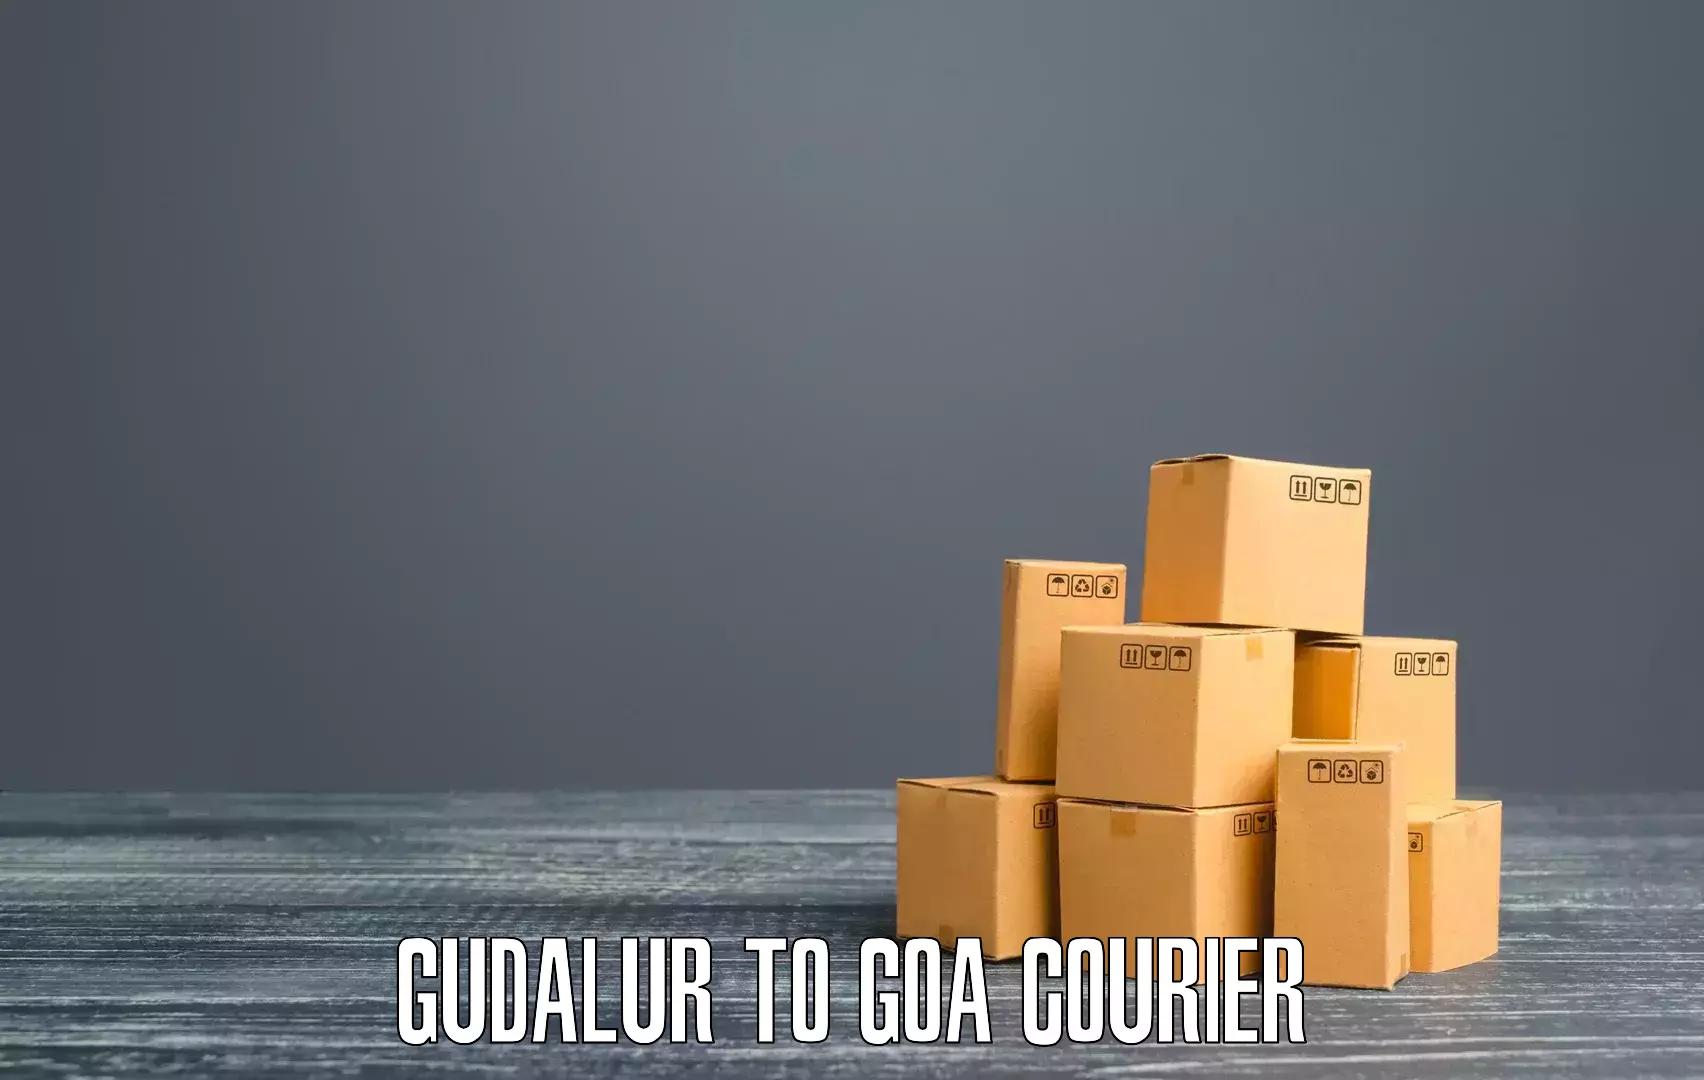 Advanced tracking systems Gudalur to Goa